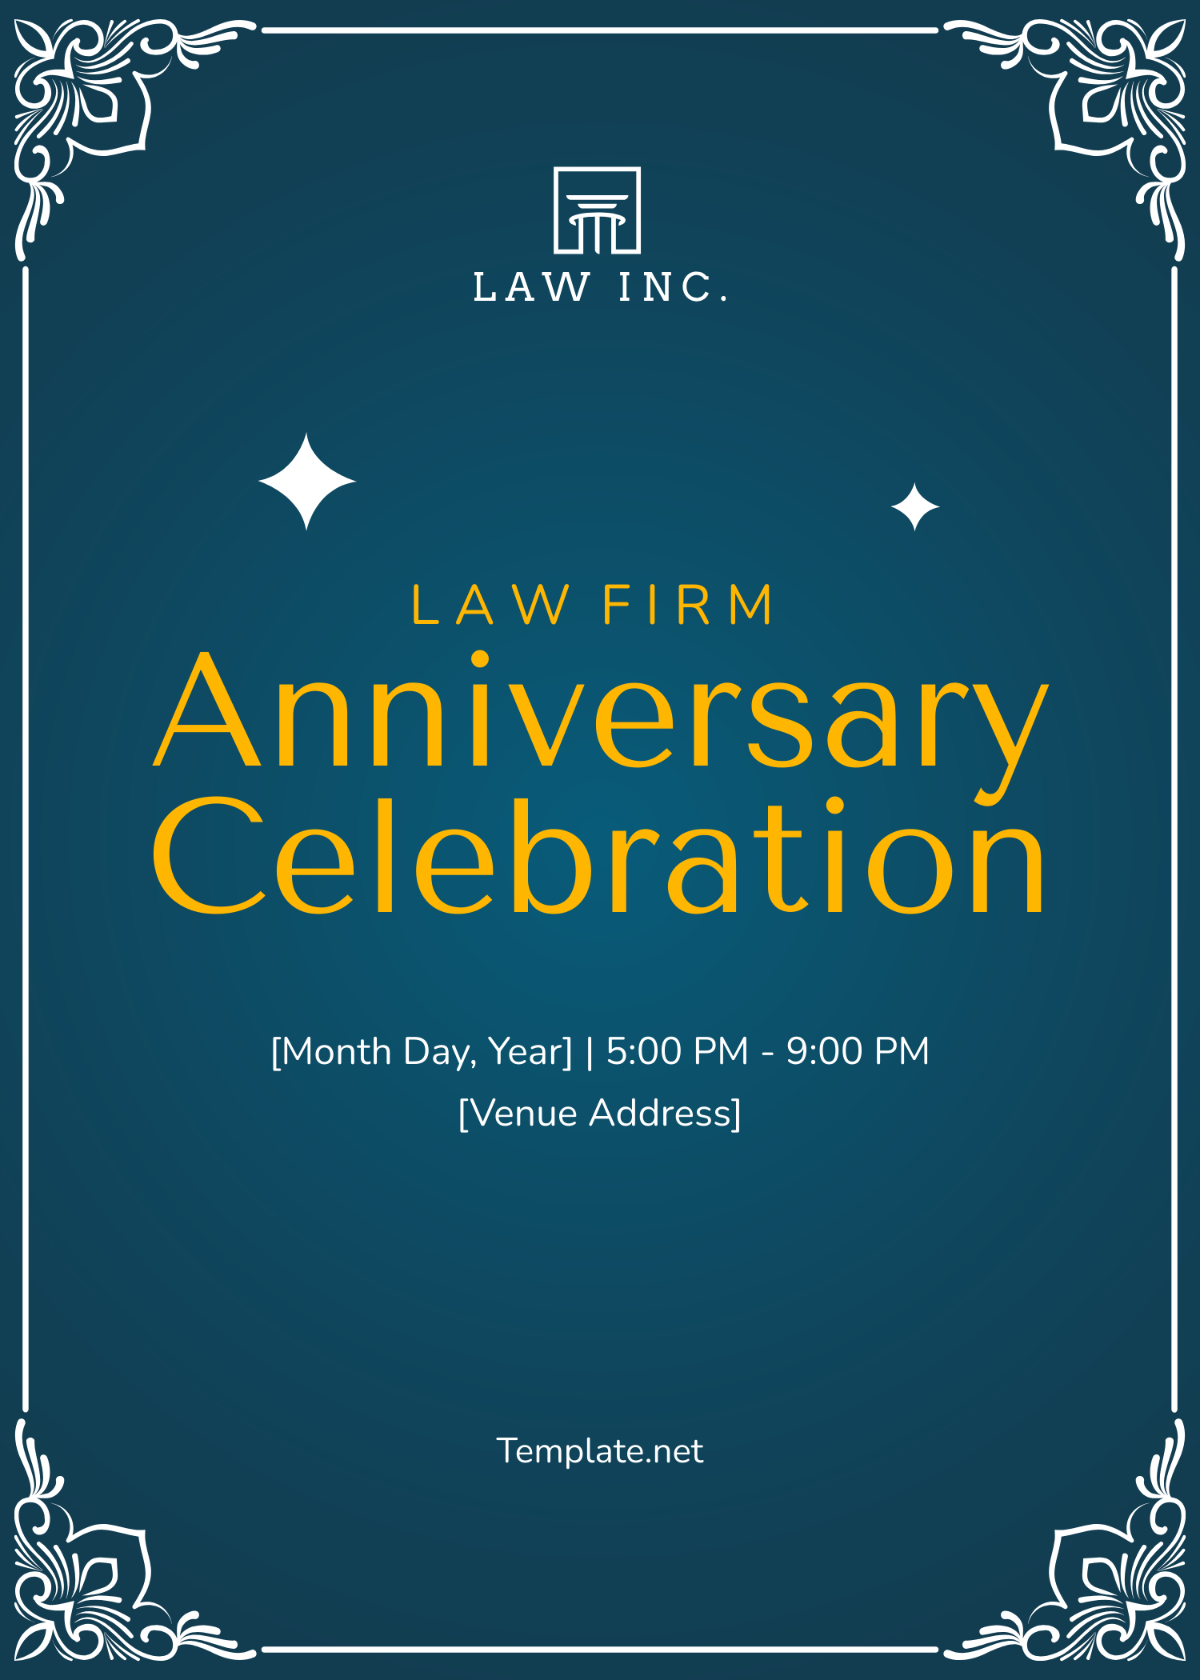 Free Law Firm Party Invitation Template